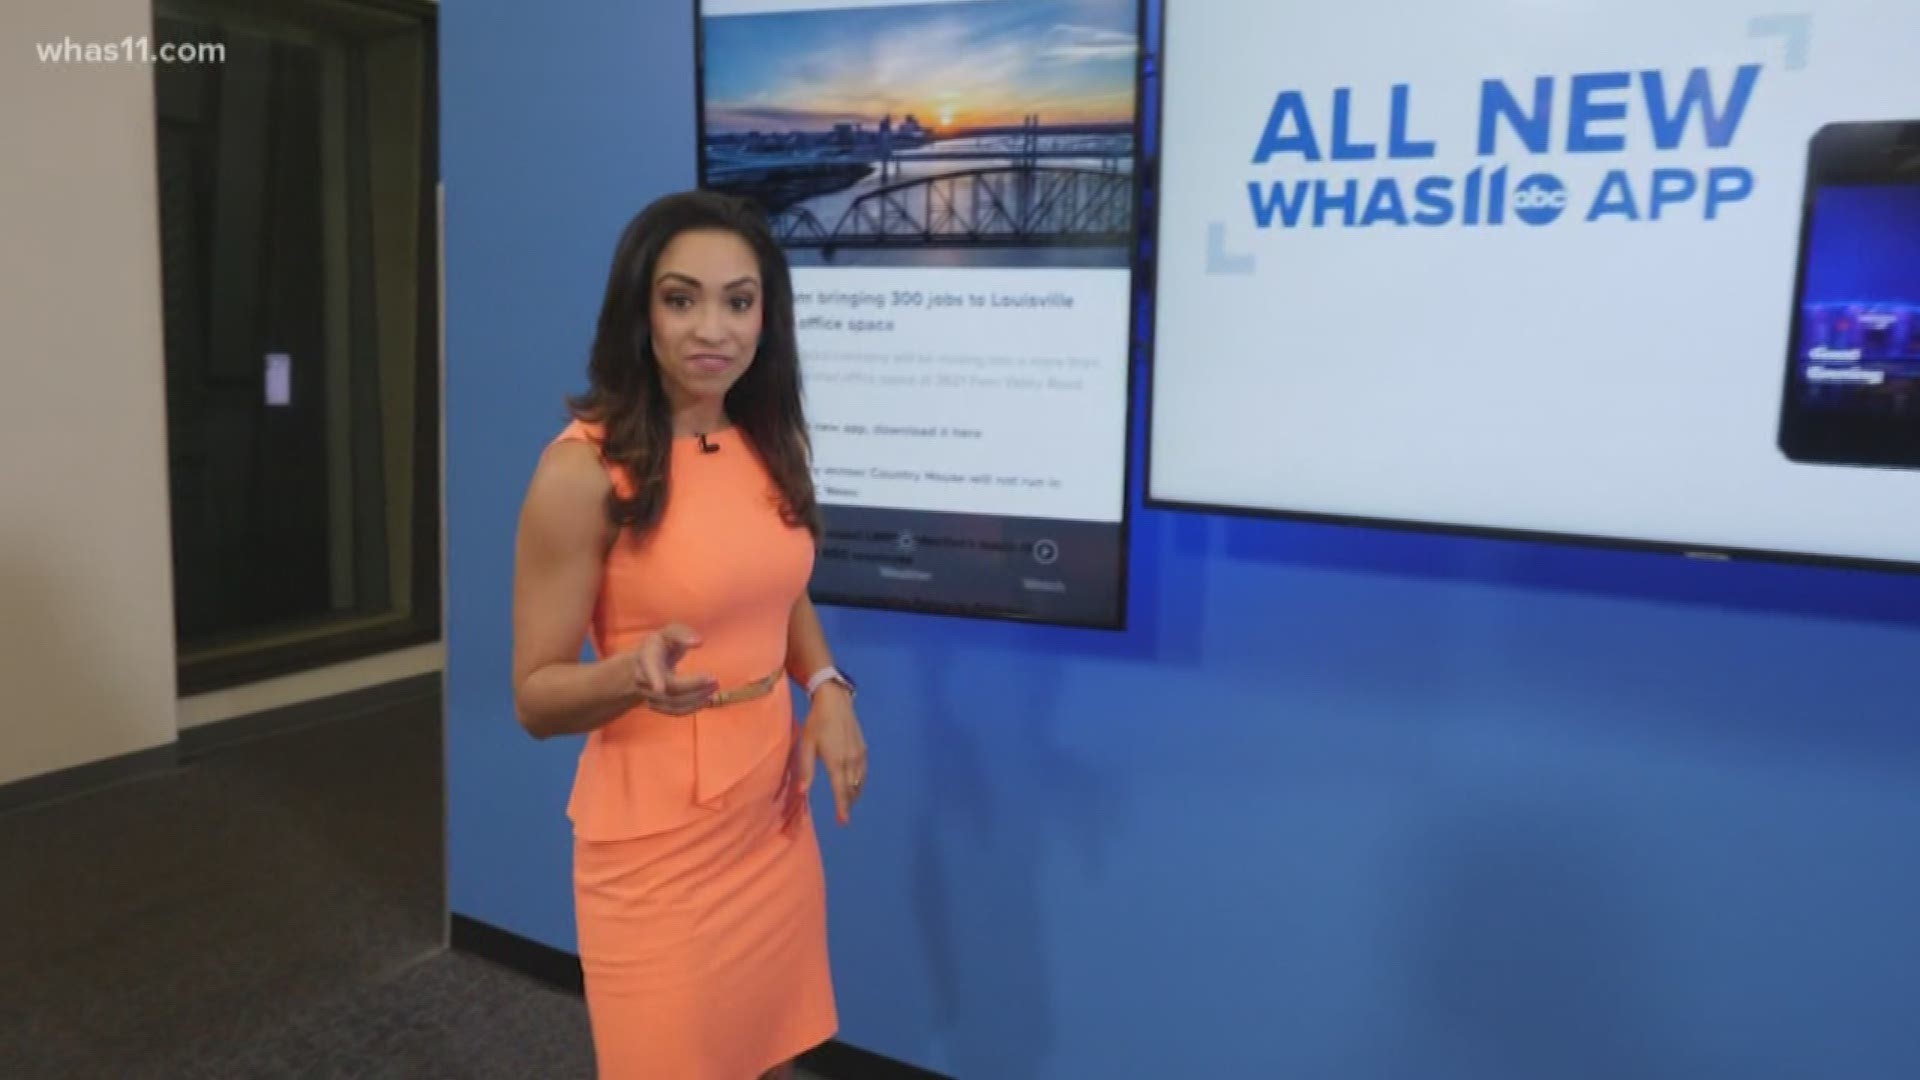 WHAS11 is launching a brand new app to bring you the news you want when you want it. Go into the app store on your device and download the app today!